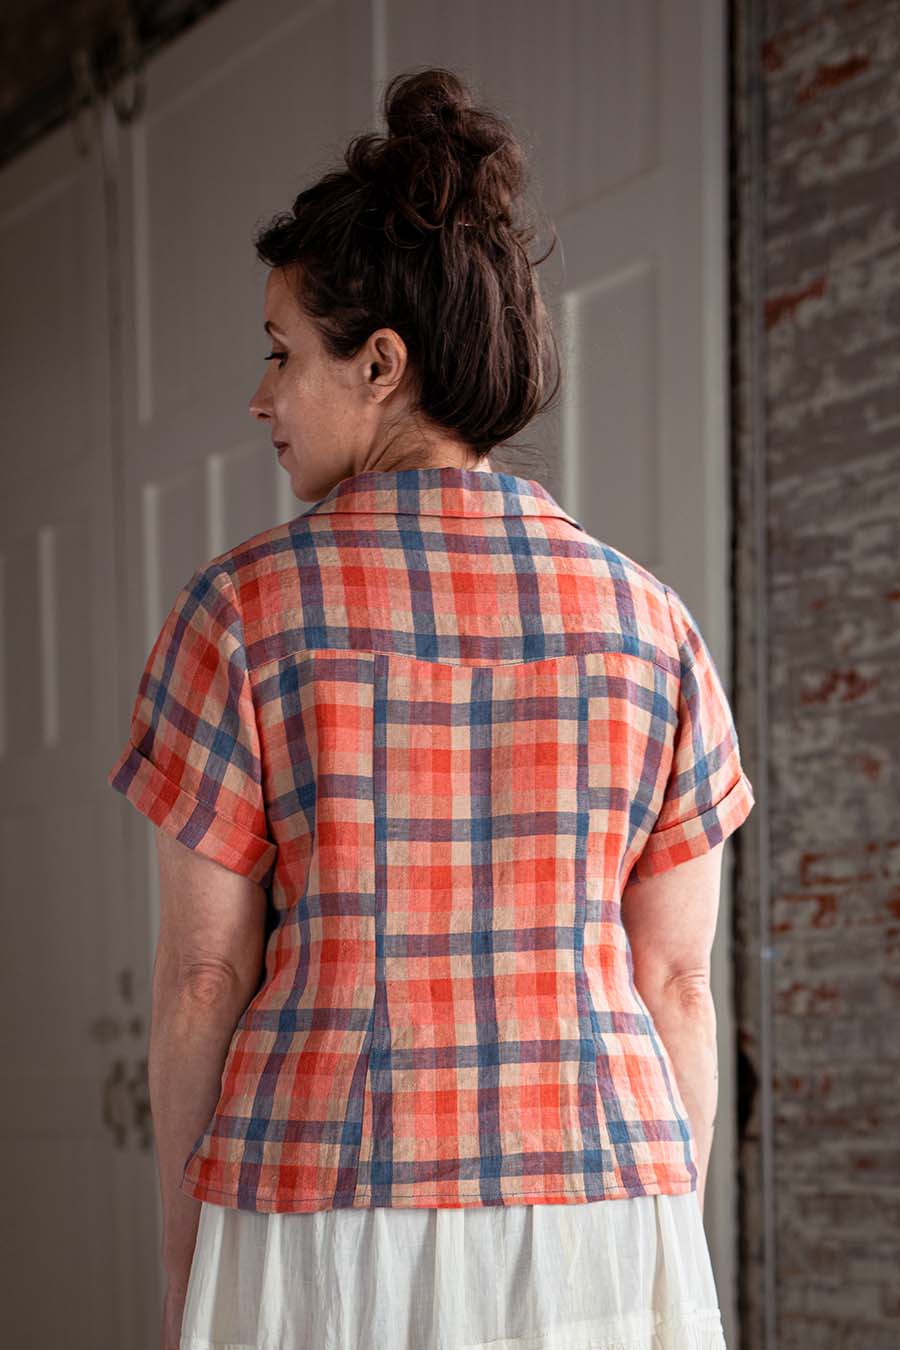 Meg wearing a red plaid, view a Joanie Top